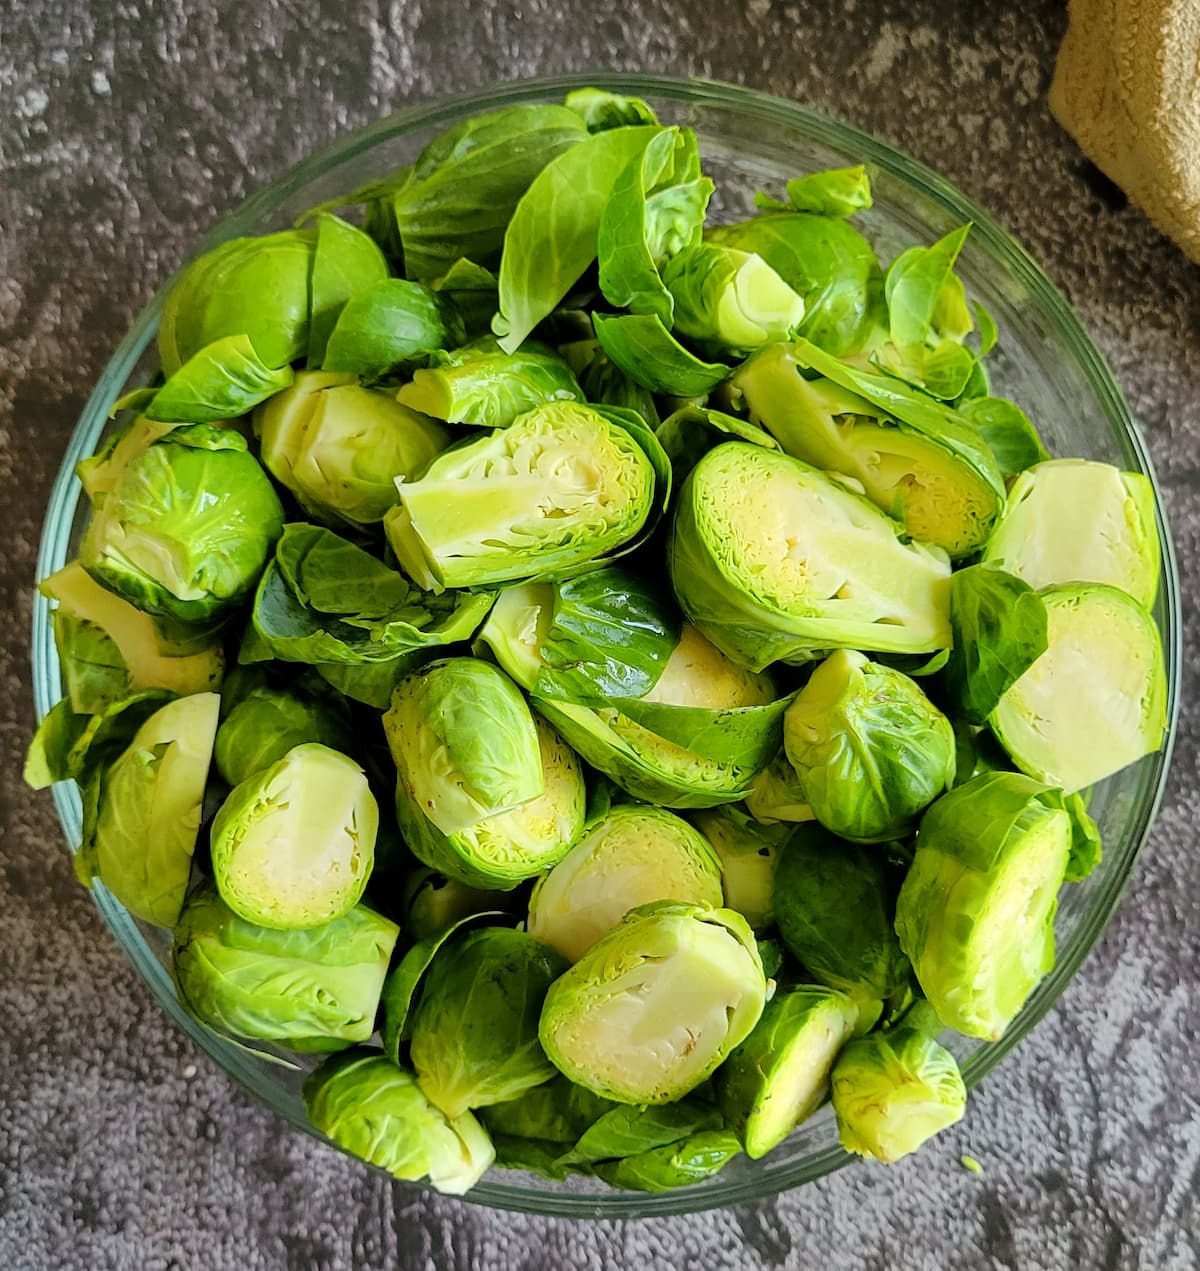 halved and trimmed raw brussels sprouts in a bowl